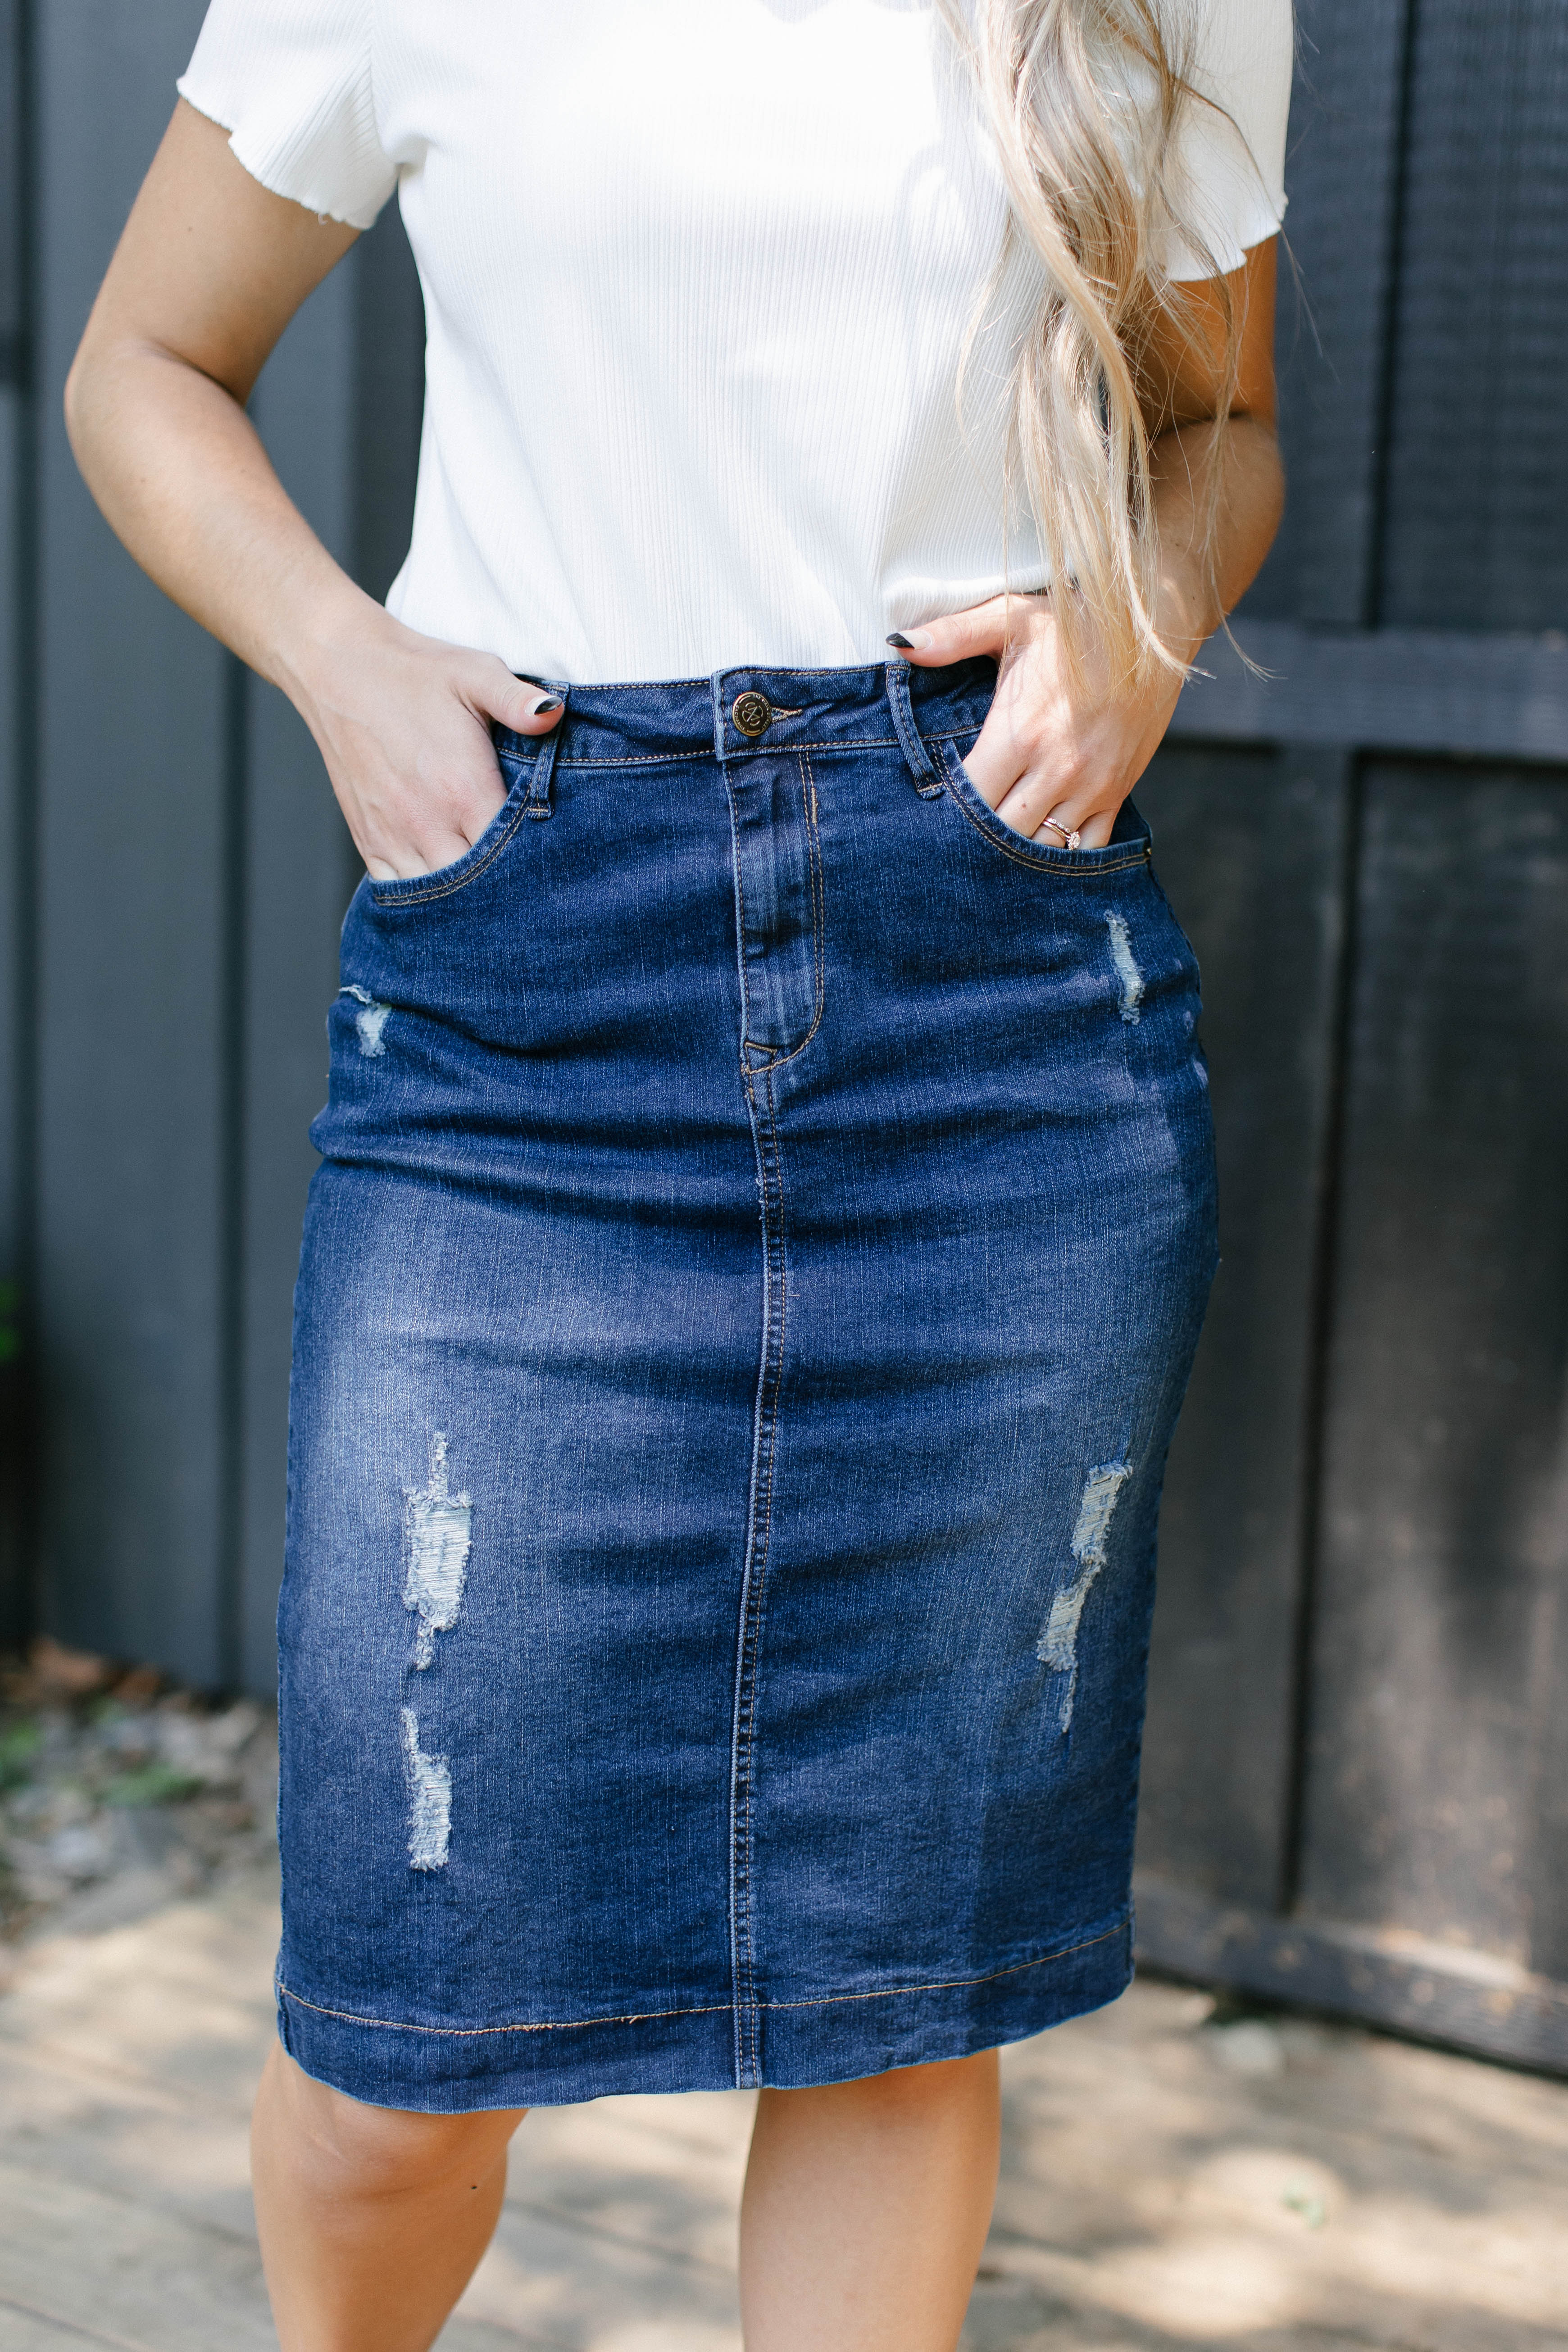 The Distressed Denim Skirt  Flip And Style